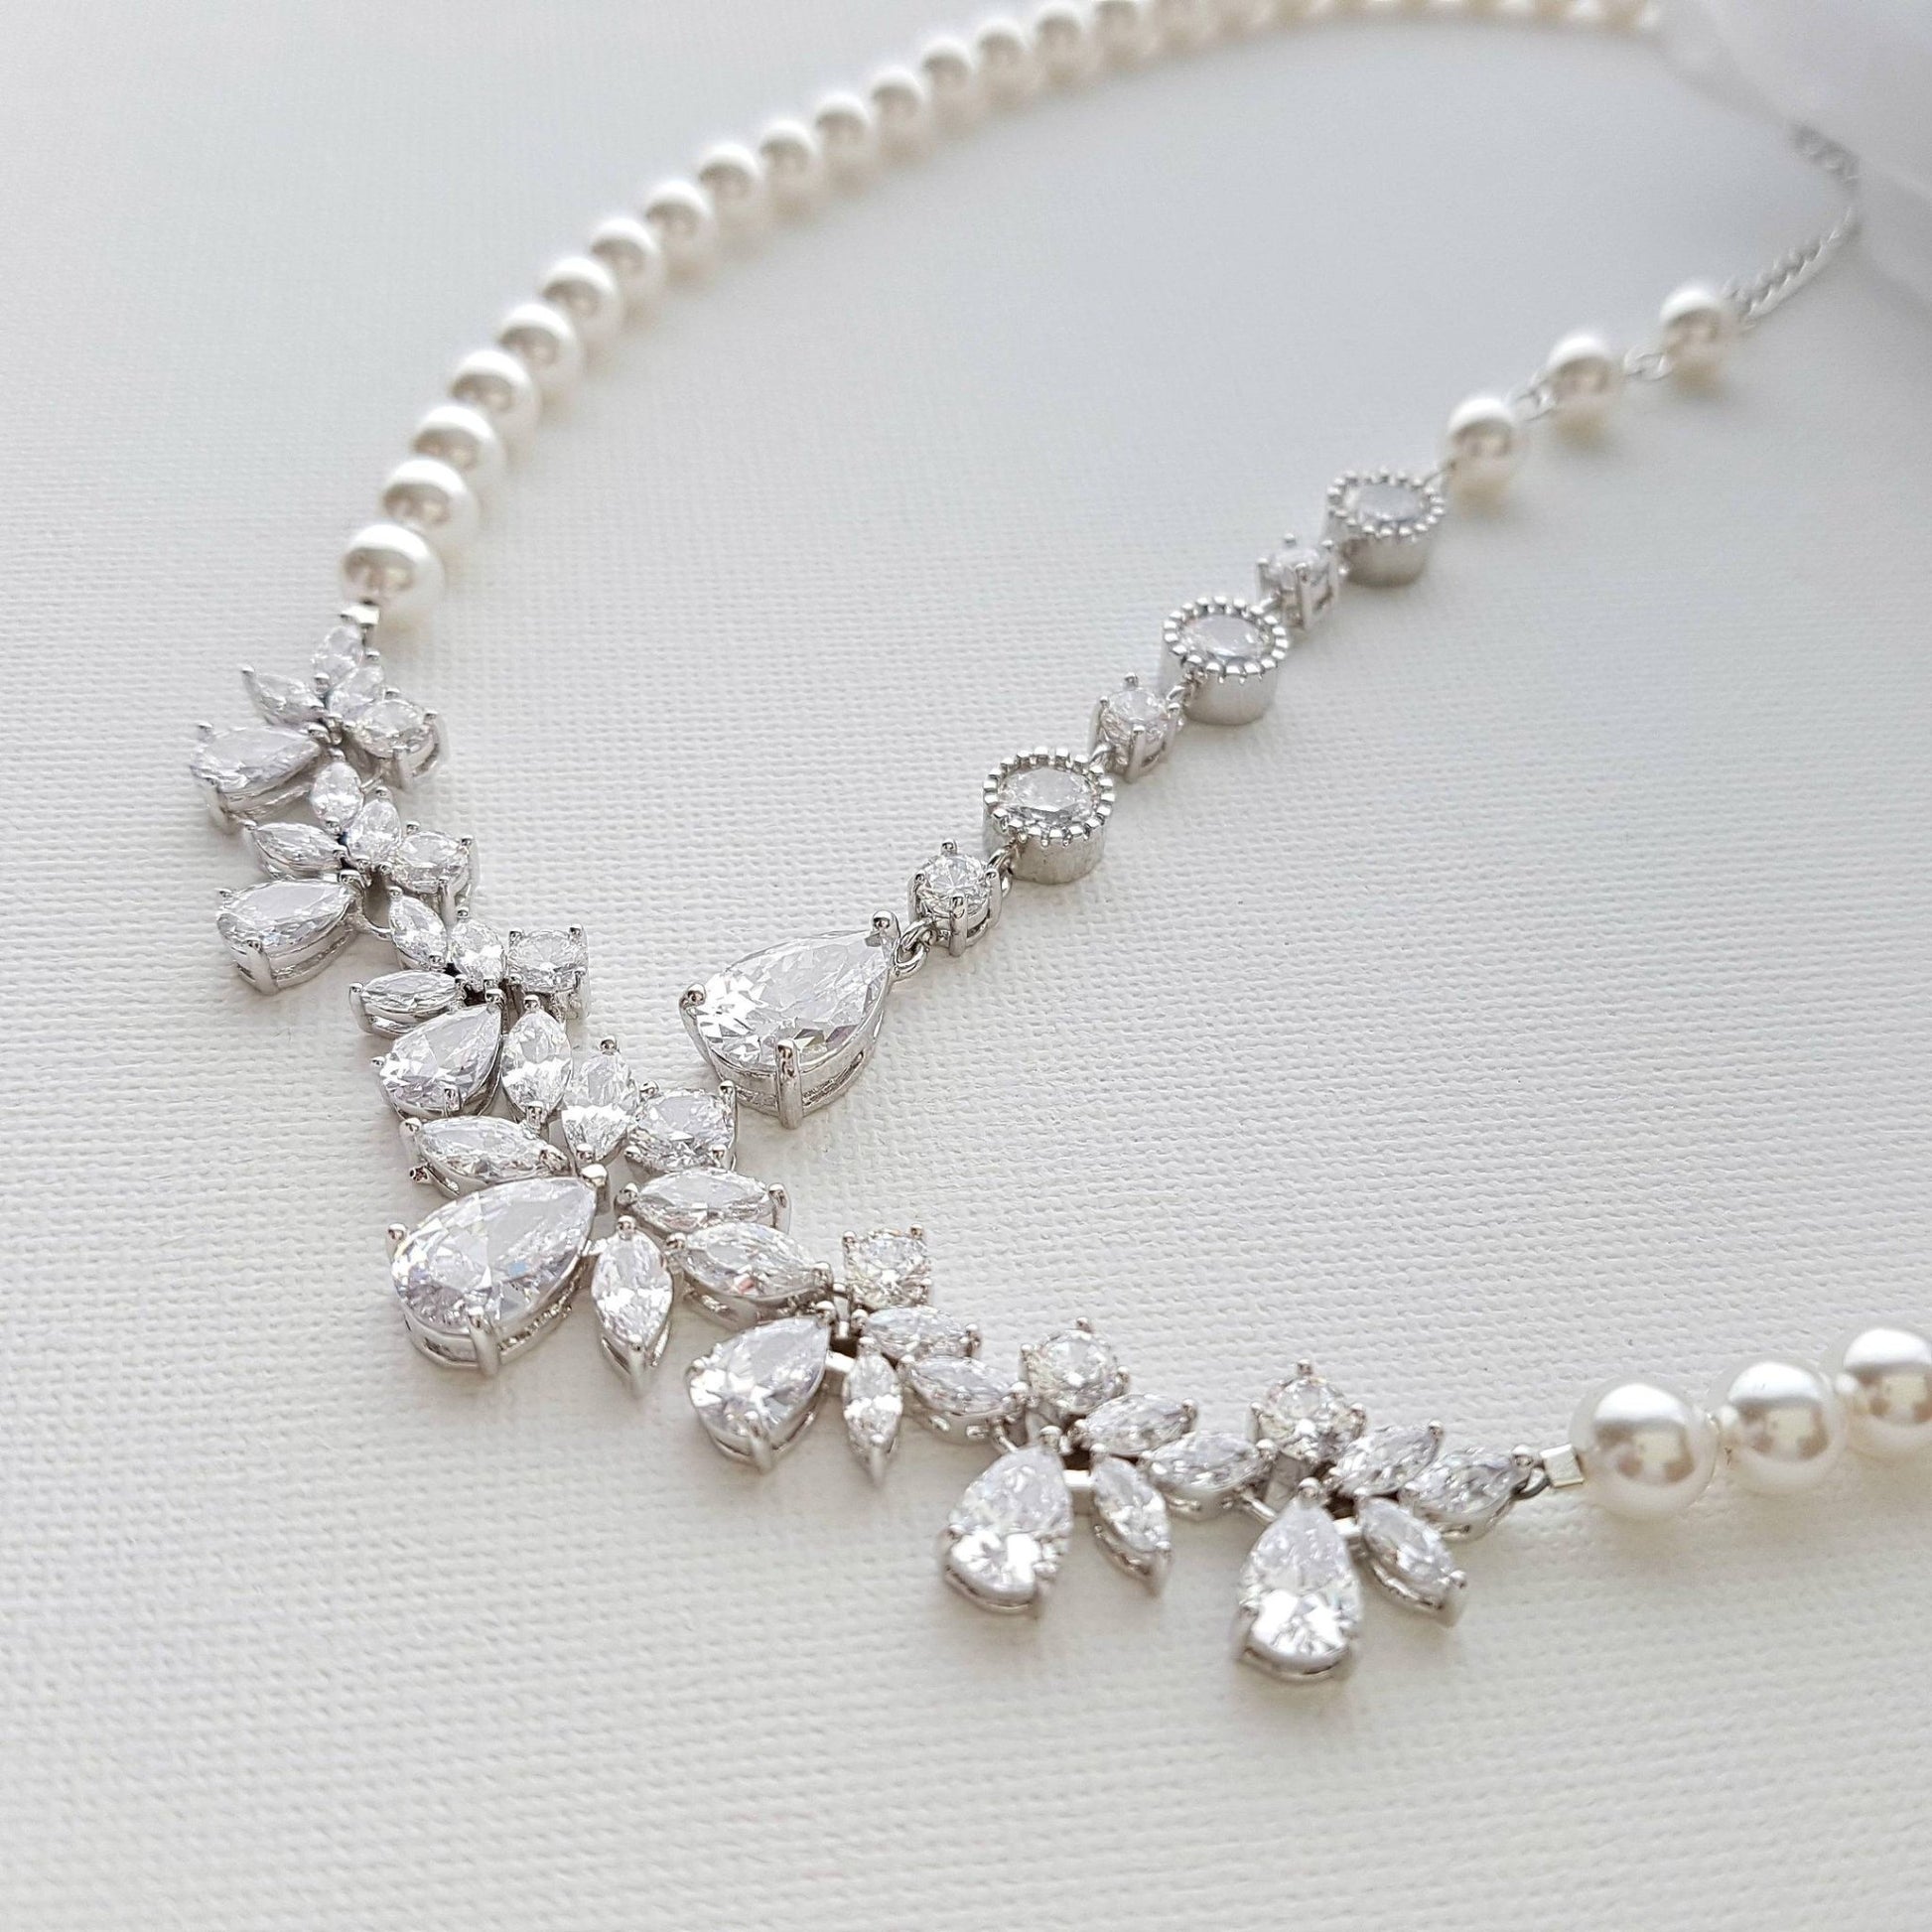 Back Bridal Necklace, Crystal and Pearl Wedding Necklace, Wedding Back Necklace, Necklace with Backdrop, Back Bridal Jewelry, Nicole - PoetryDesigns